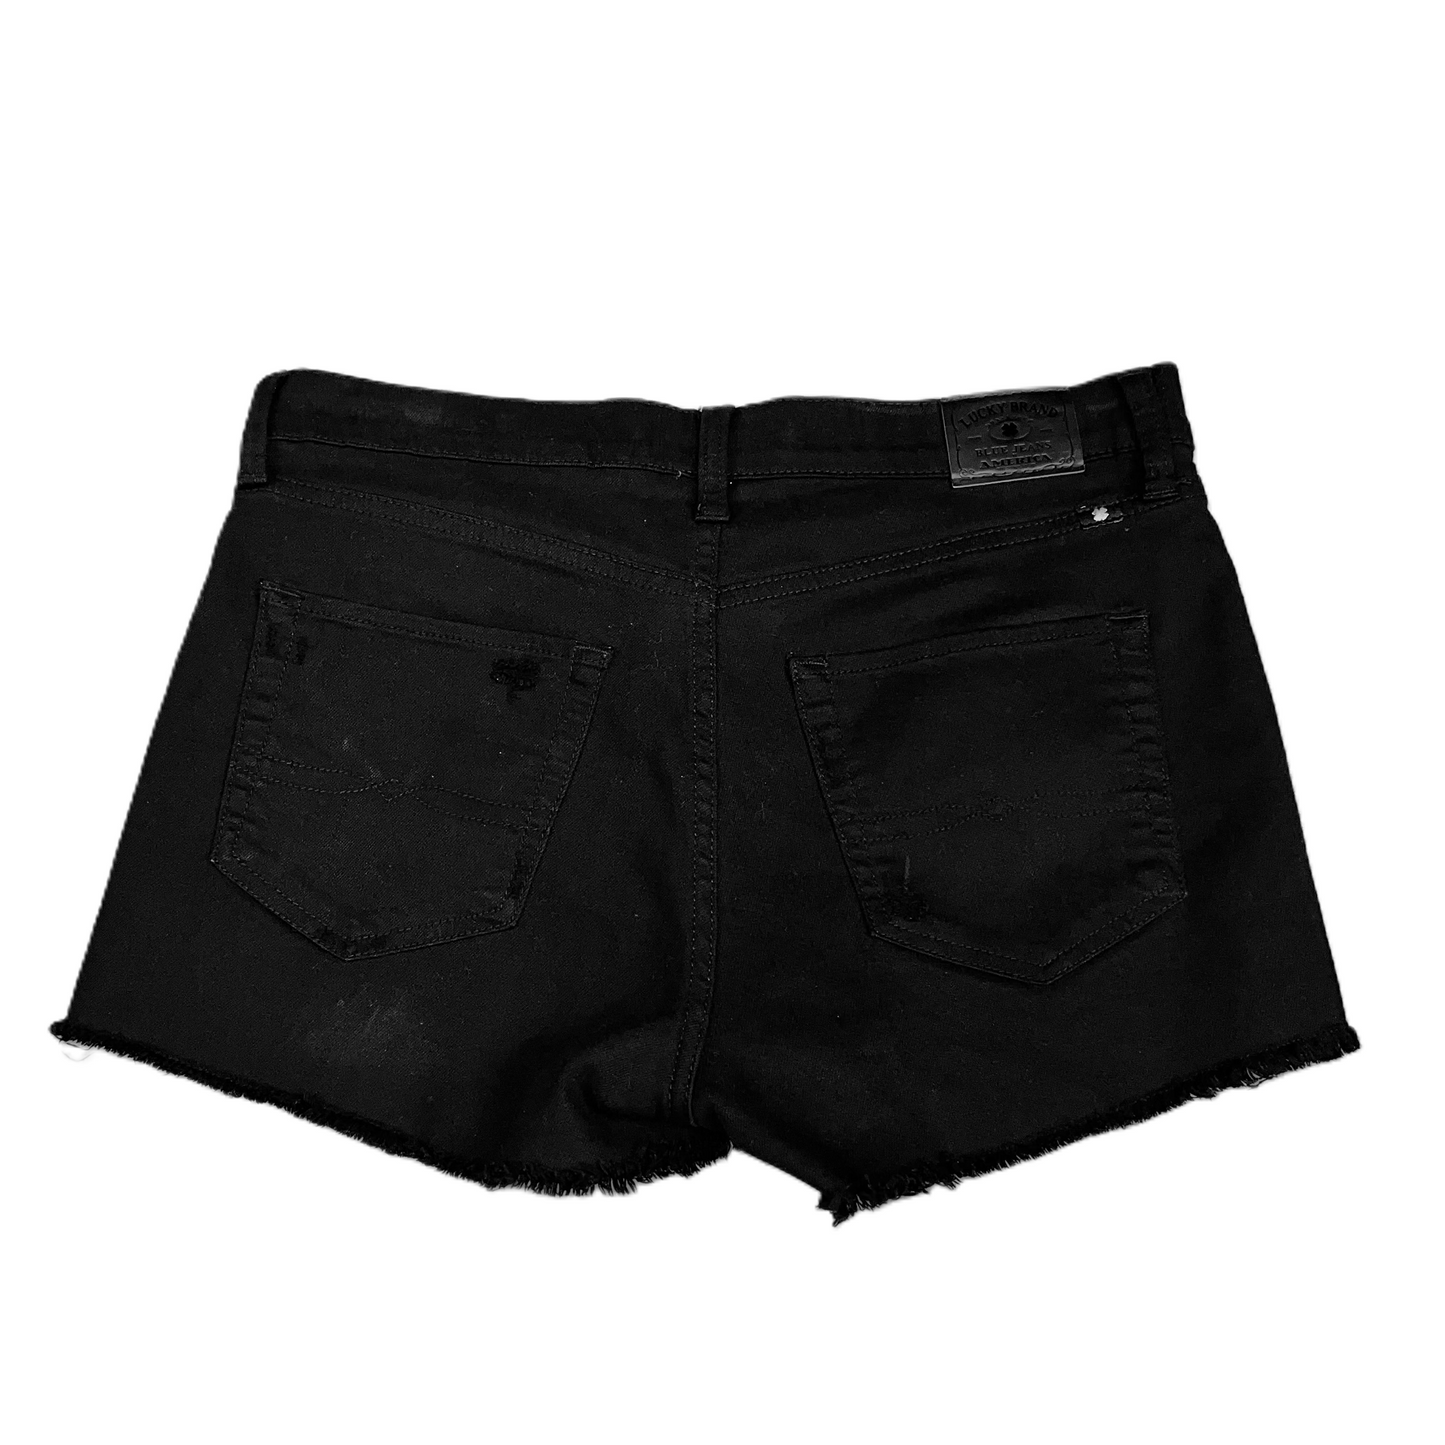 Black Shorts By Lucky Brand, Size: 10